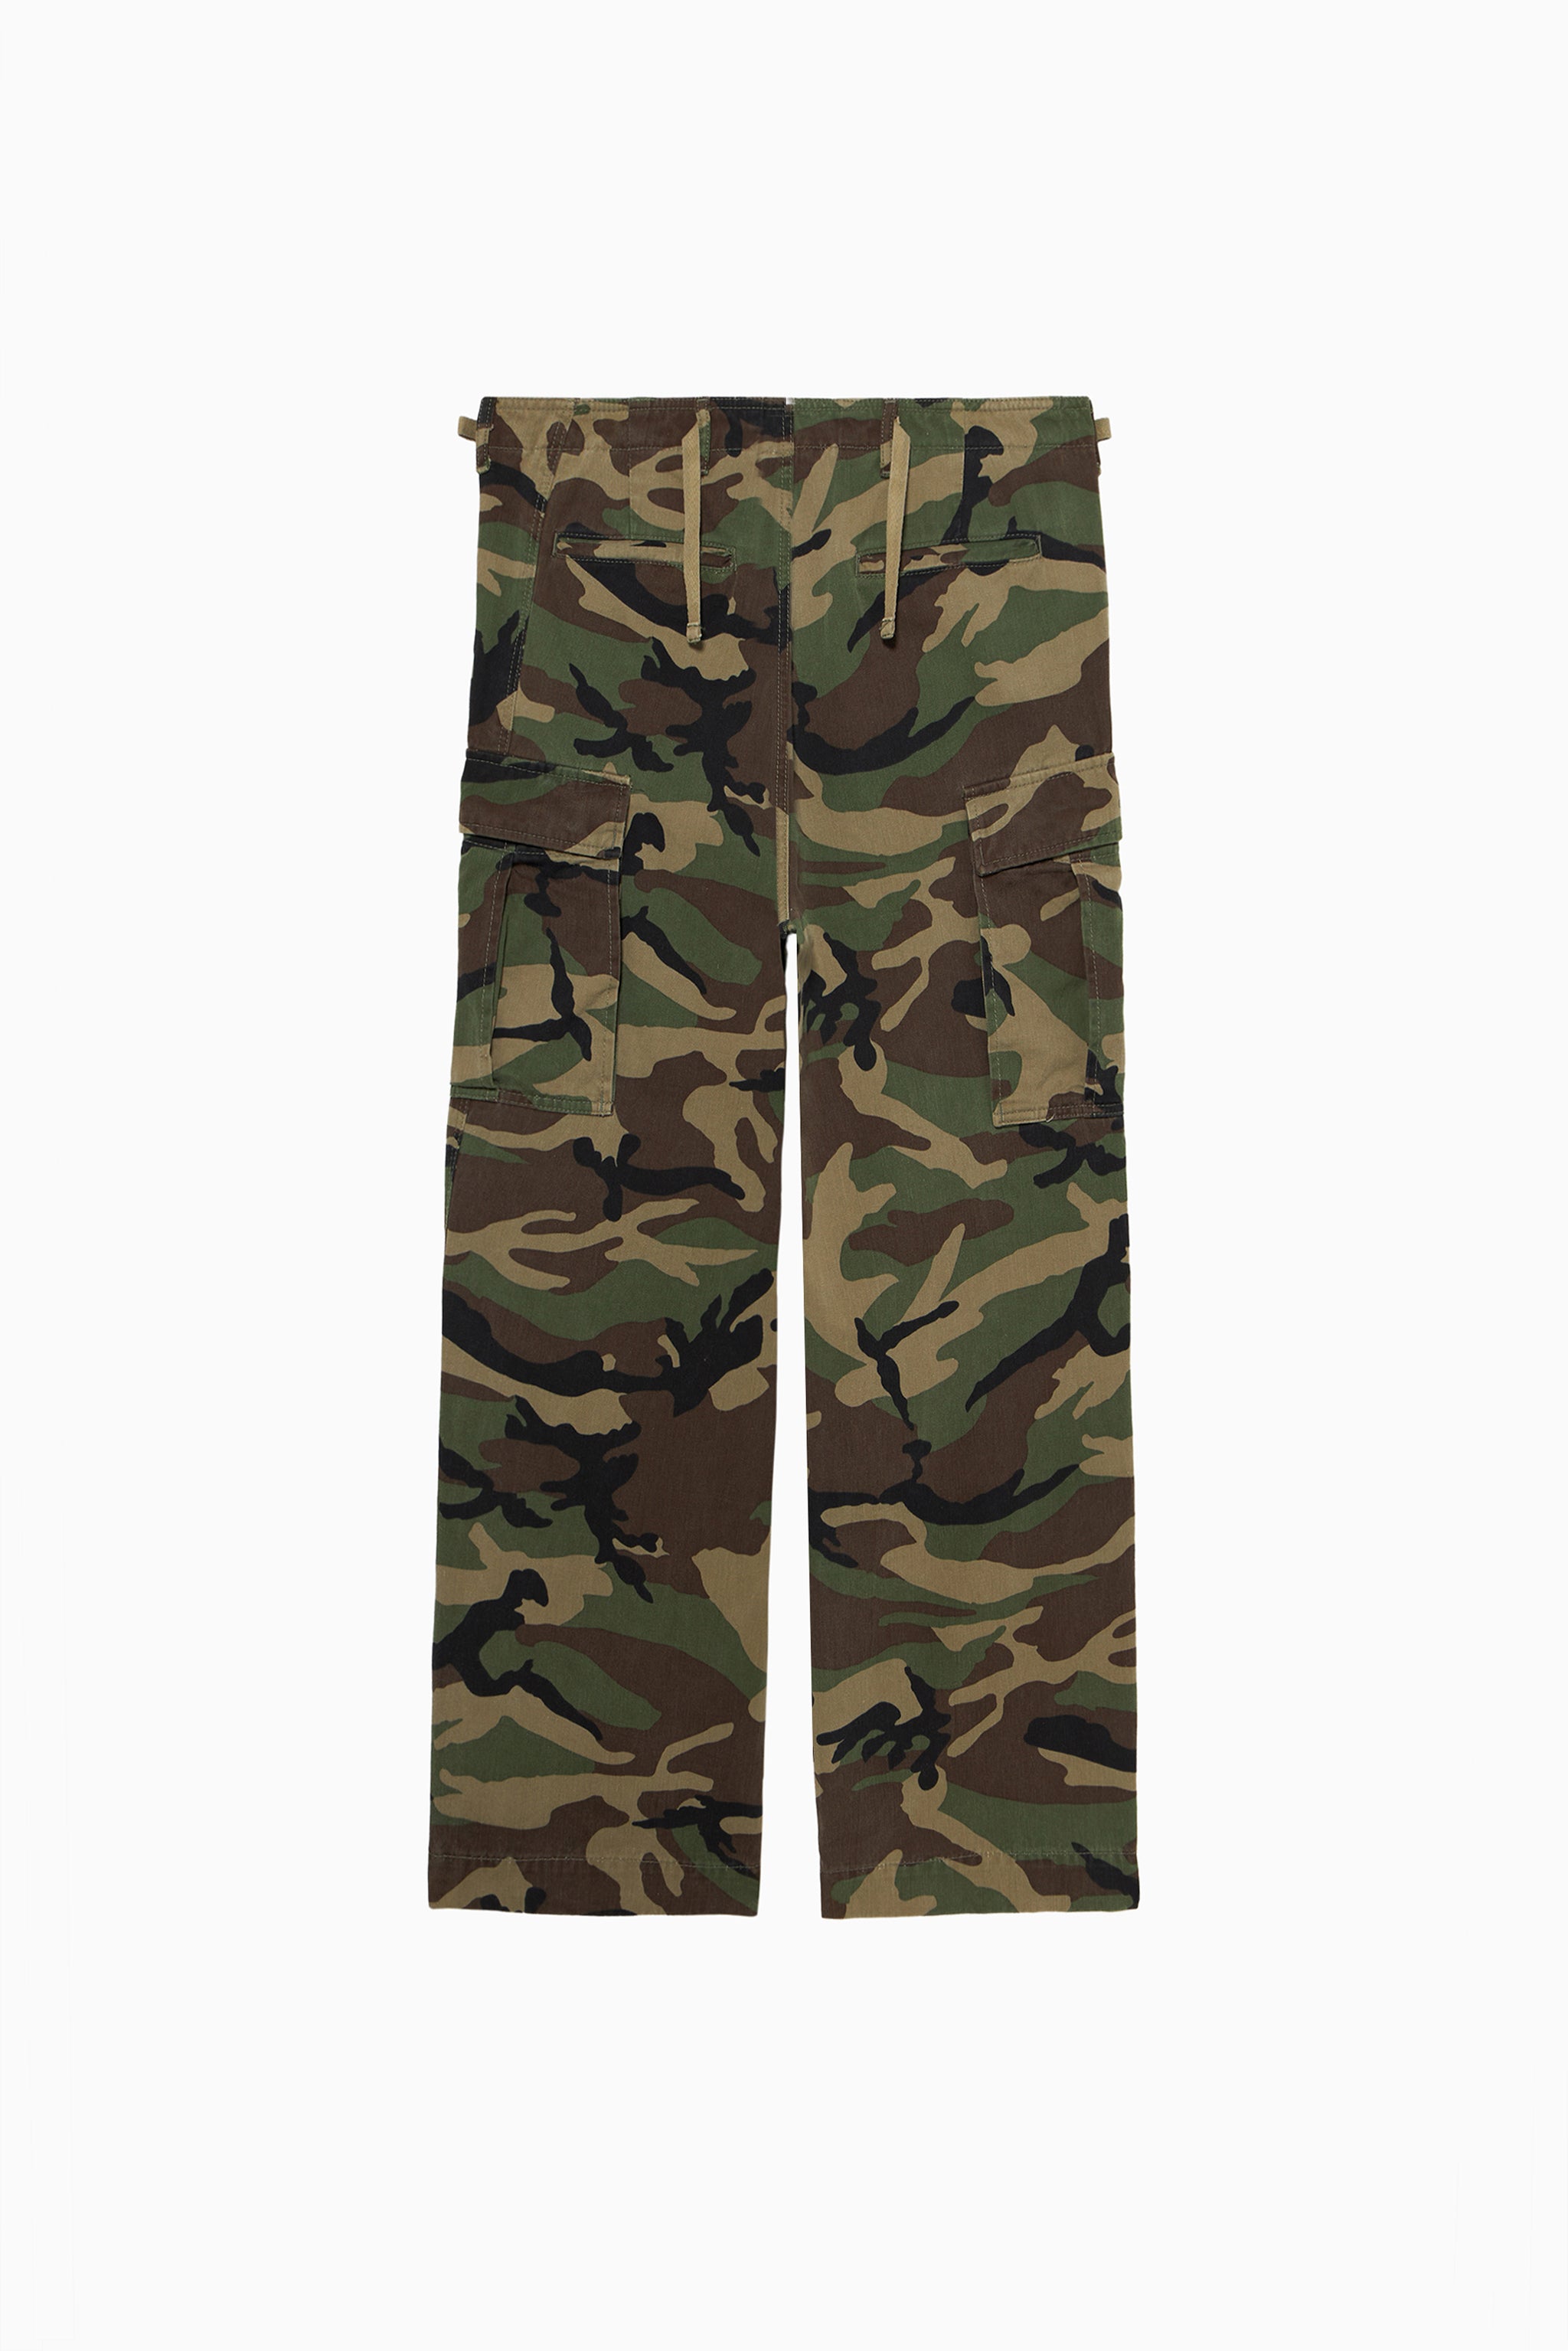 Men WOODLAND ADVANCED WR RIPSTOP TACTICAL PANT at Rs 5999/piece in Ludhiana  | ID: 2852877098212